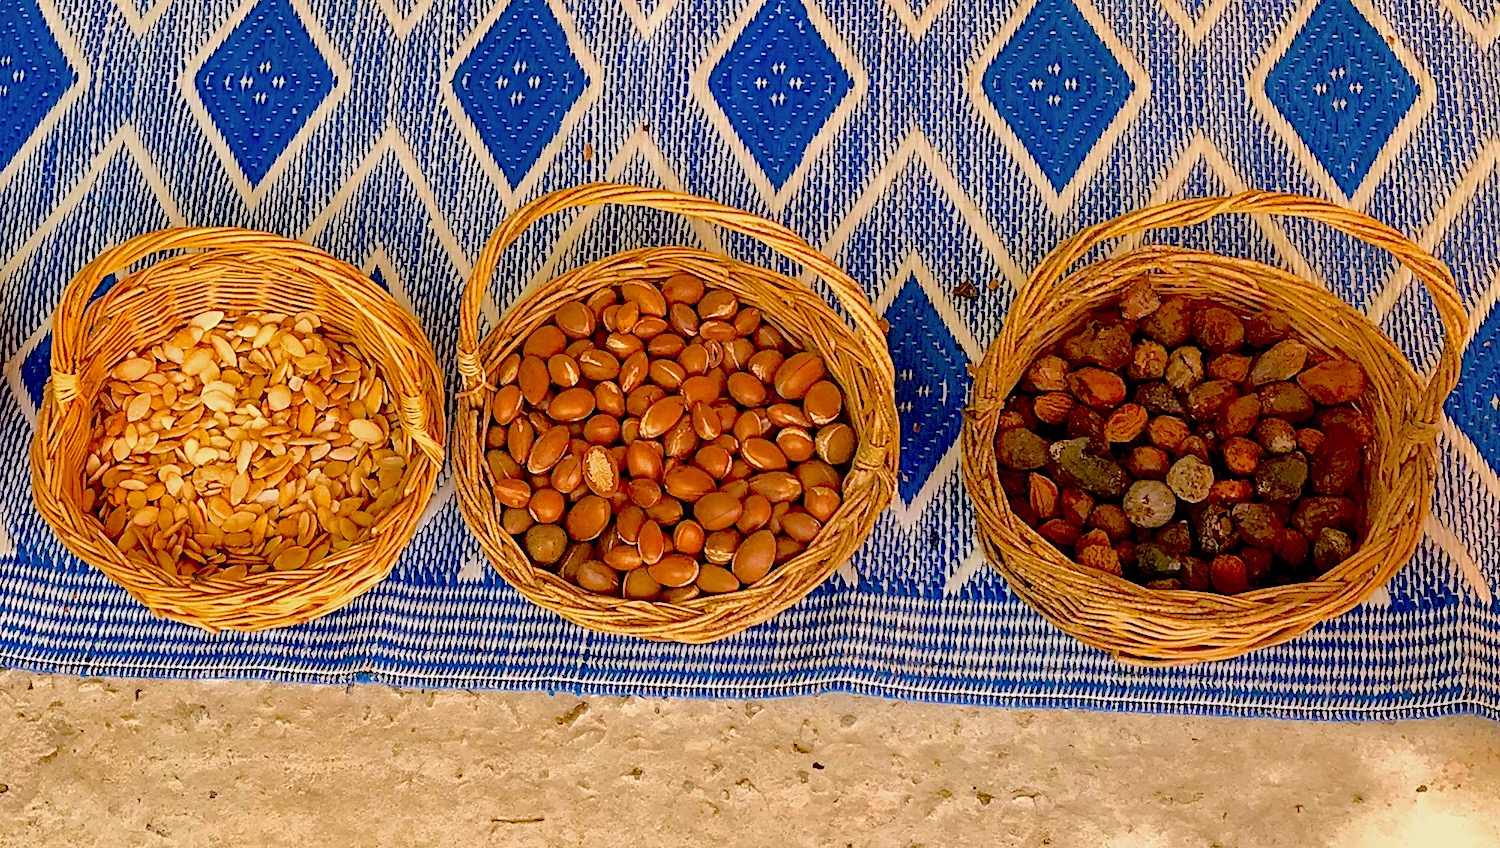 From left to right Argan seeds, pits and nuts